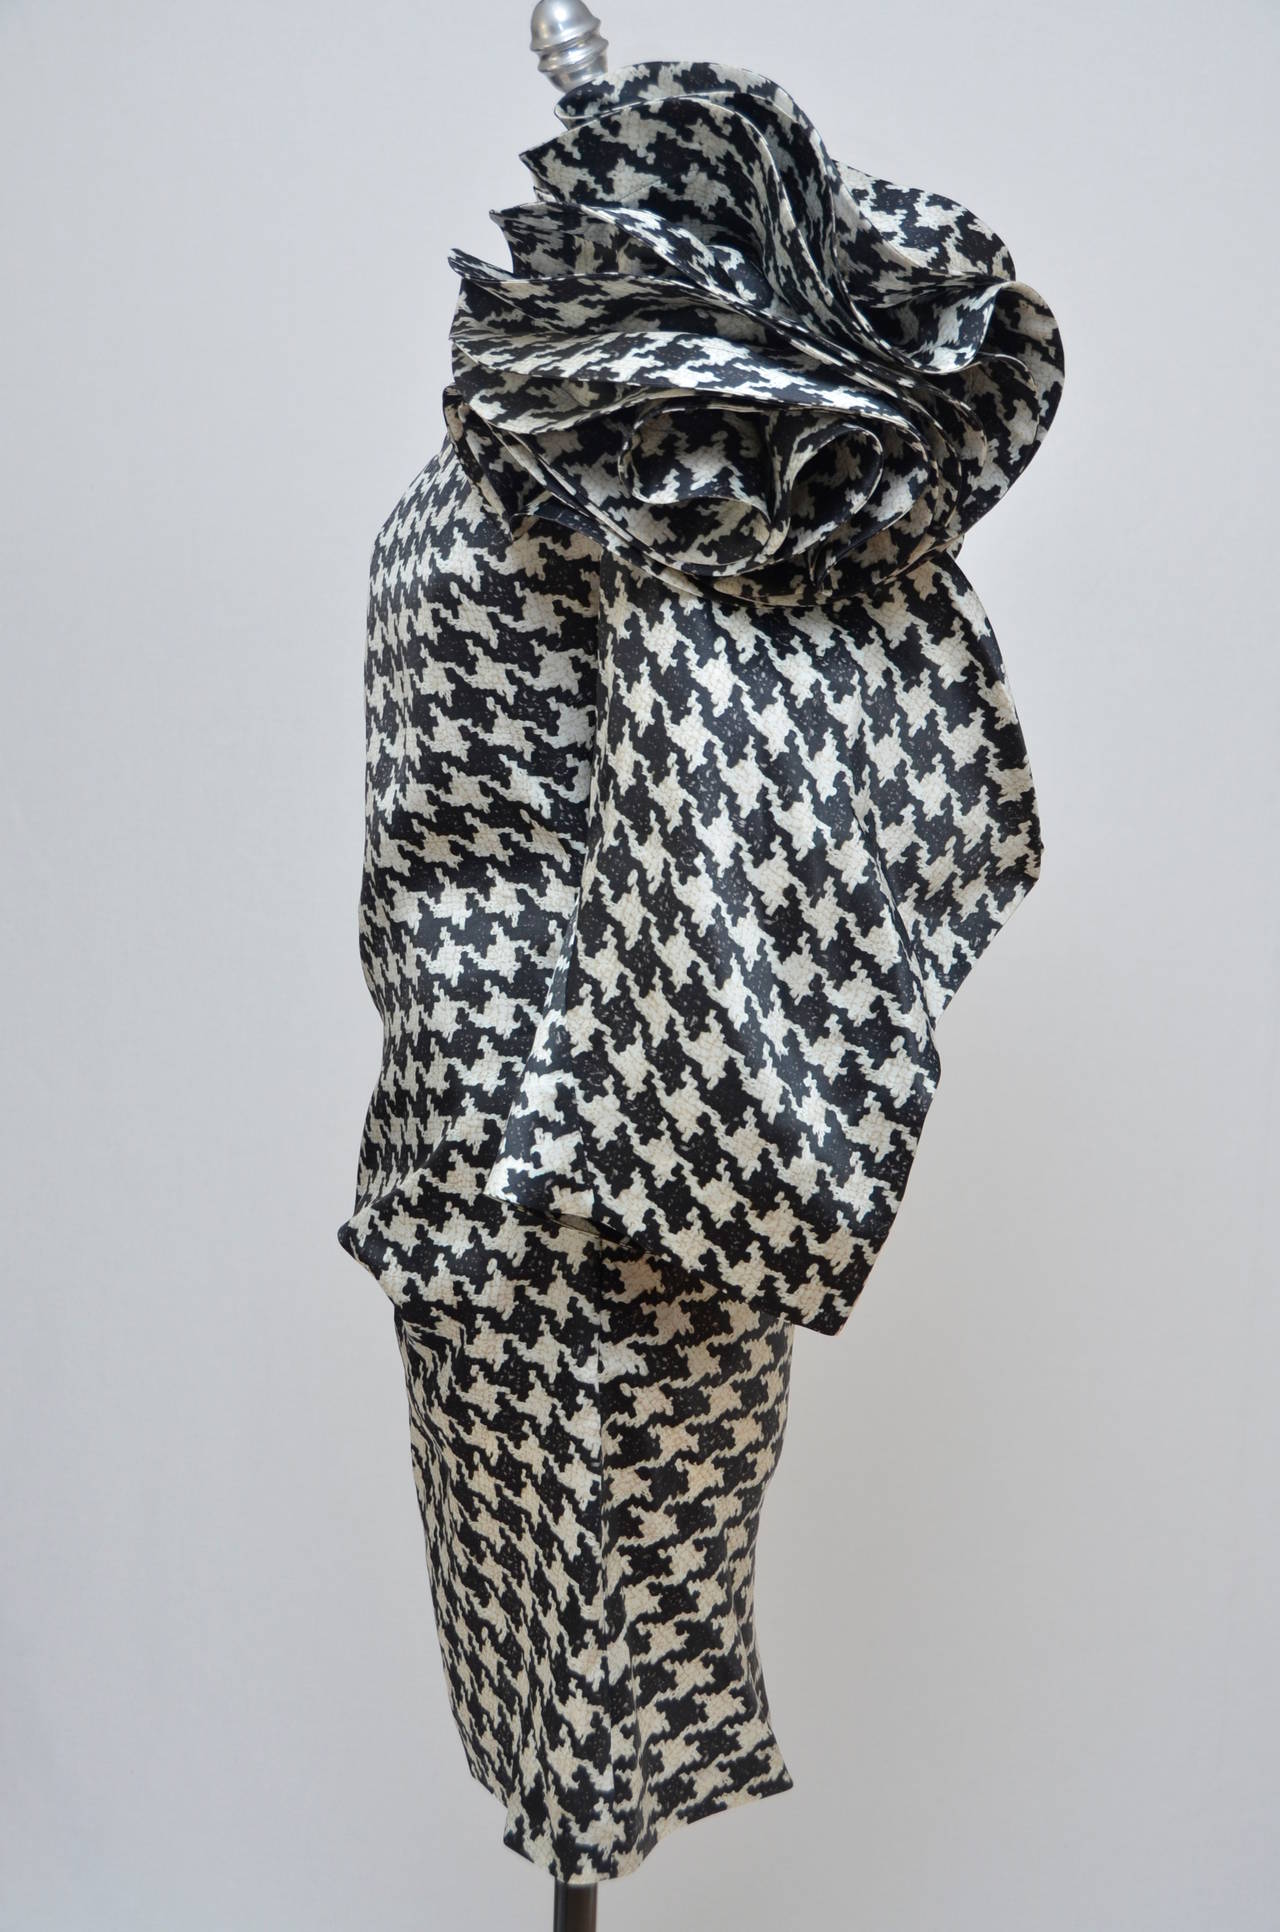 Alexander McQueen Houndstooth print dress.
Extremely rare and collectible 2009  runway dress.
For collectors and museums.
New with tags.
This stunning dress is from one of the last Alexander McQueen collections as seen on the picture with him